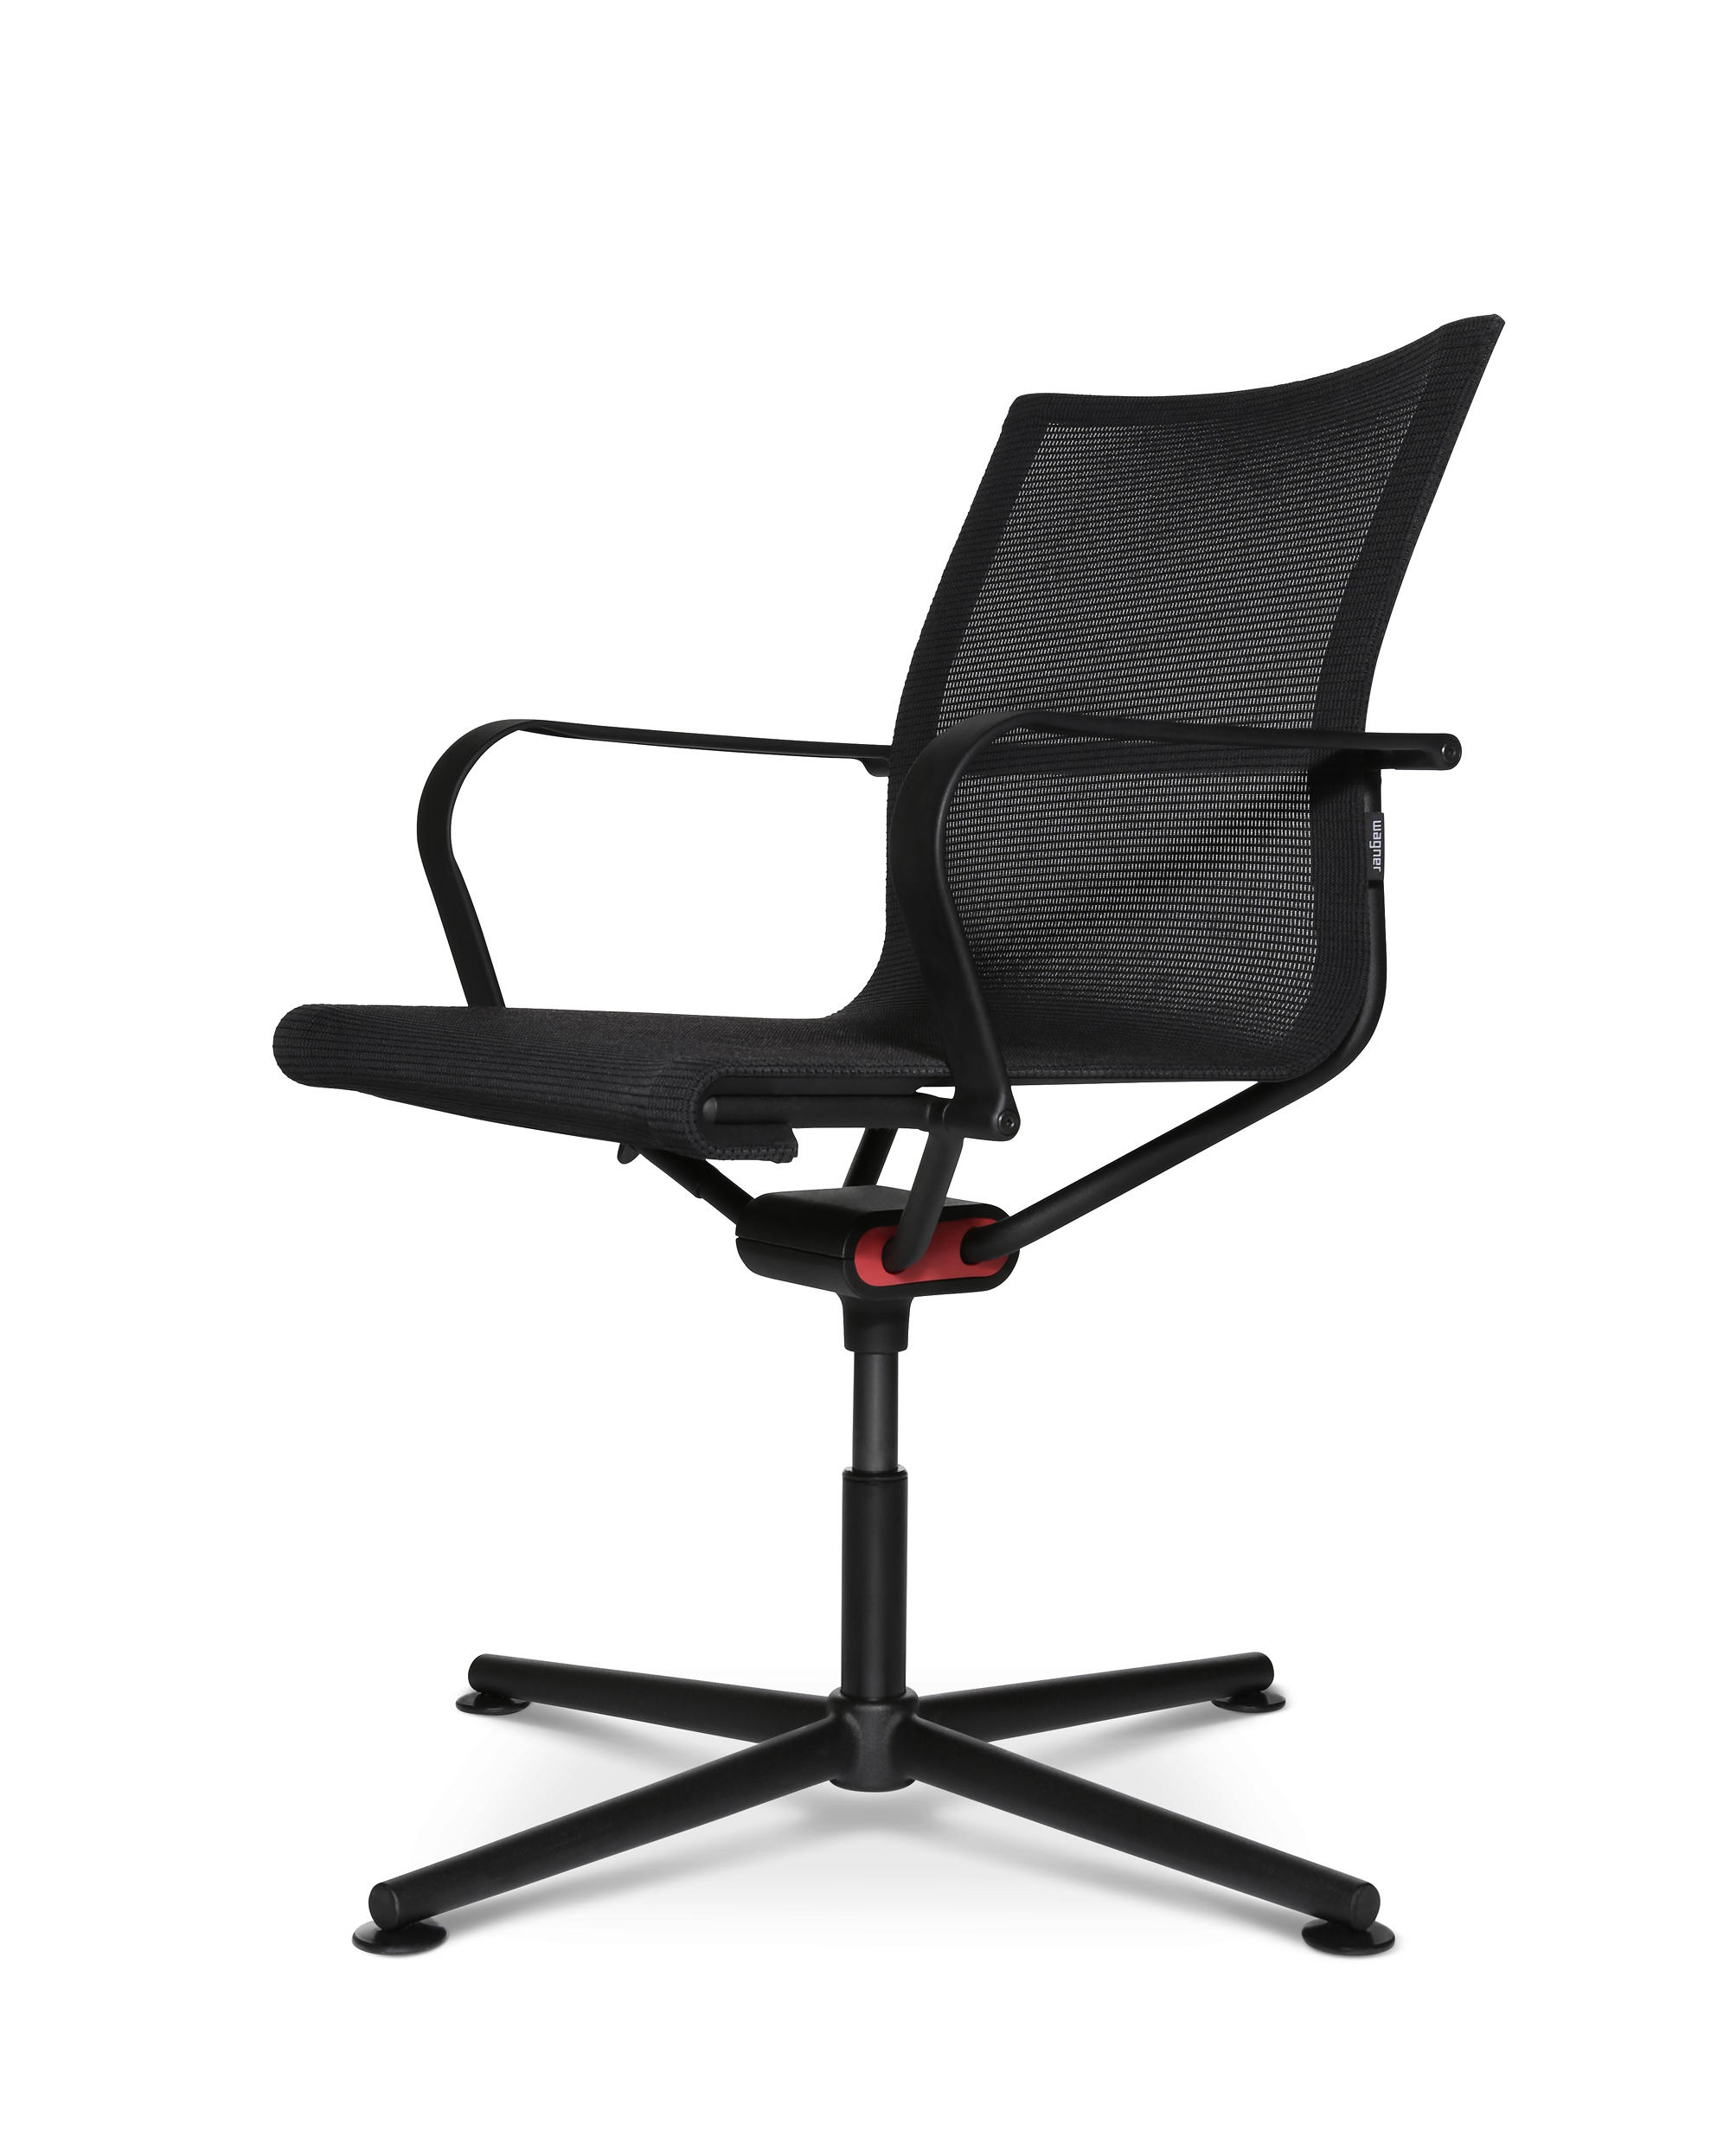 Support Group Wagner S D1 Swivel Chairs